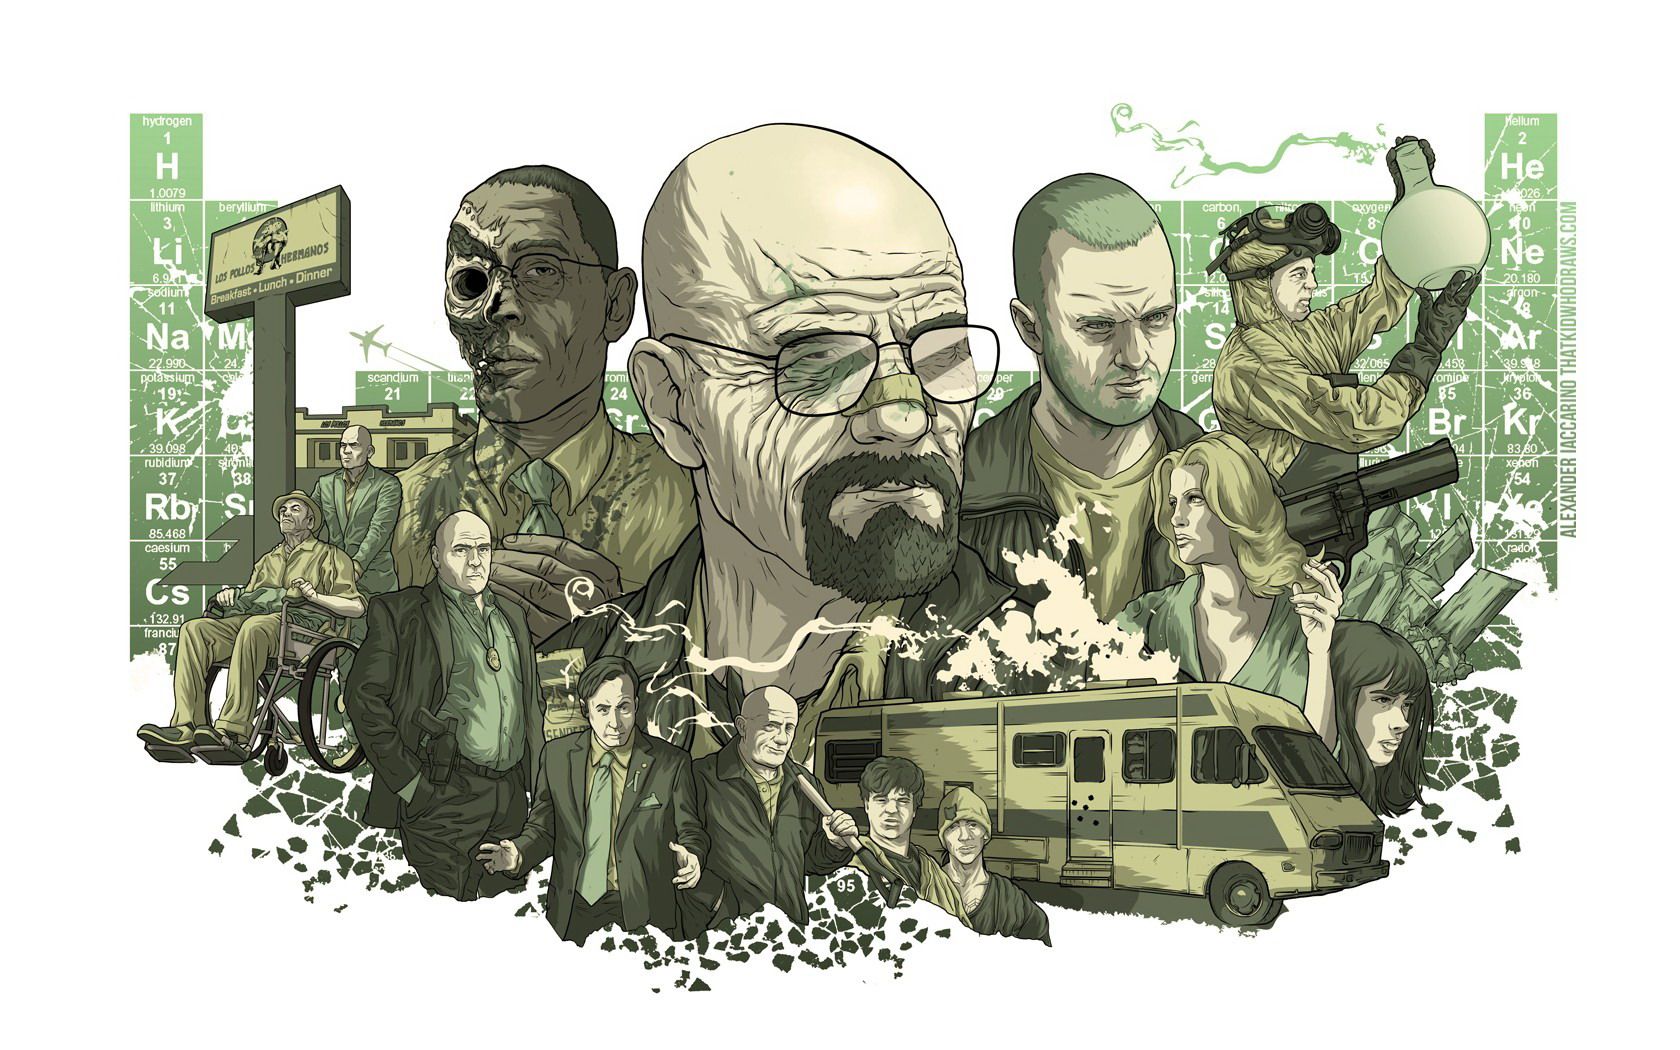 Bryan Cranston in 'Breaking Bad' by Alexander Iaccarino